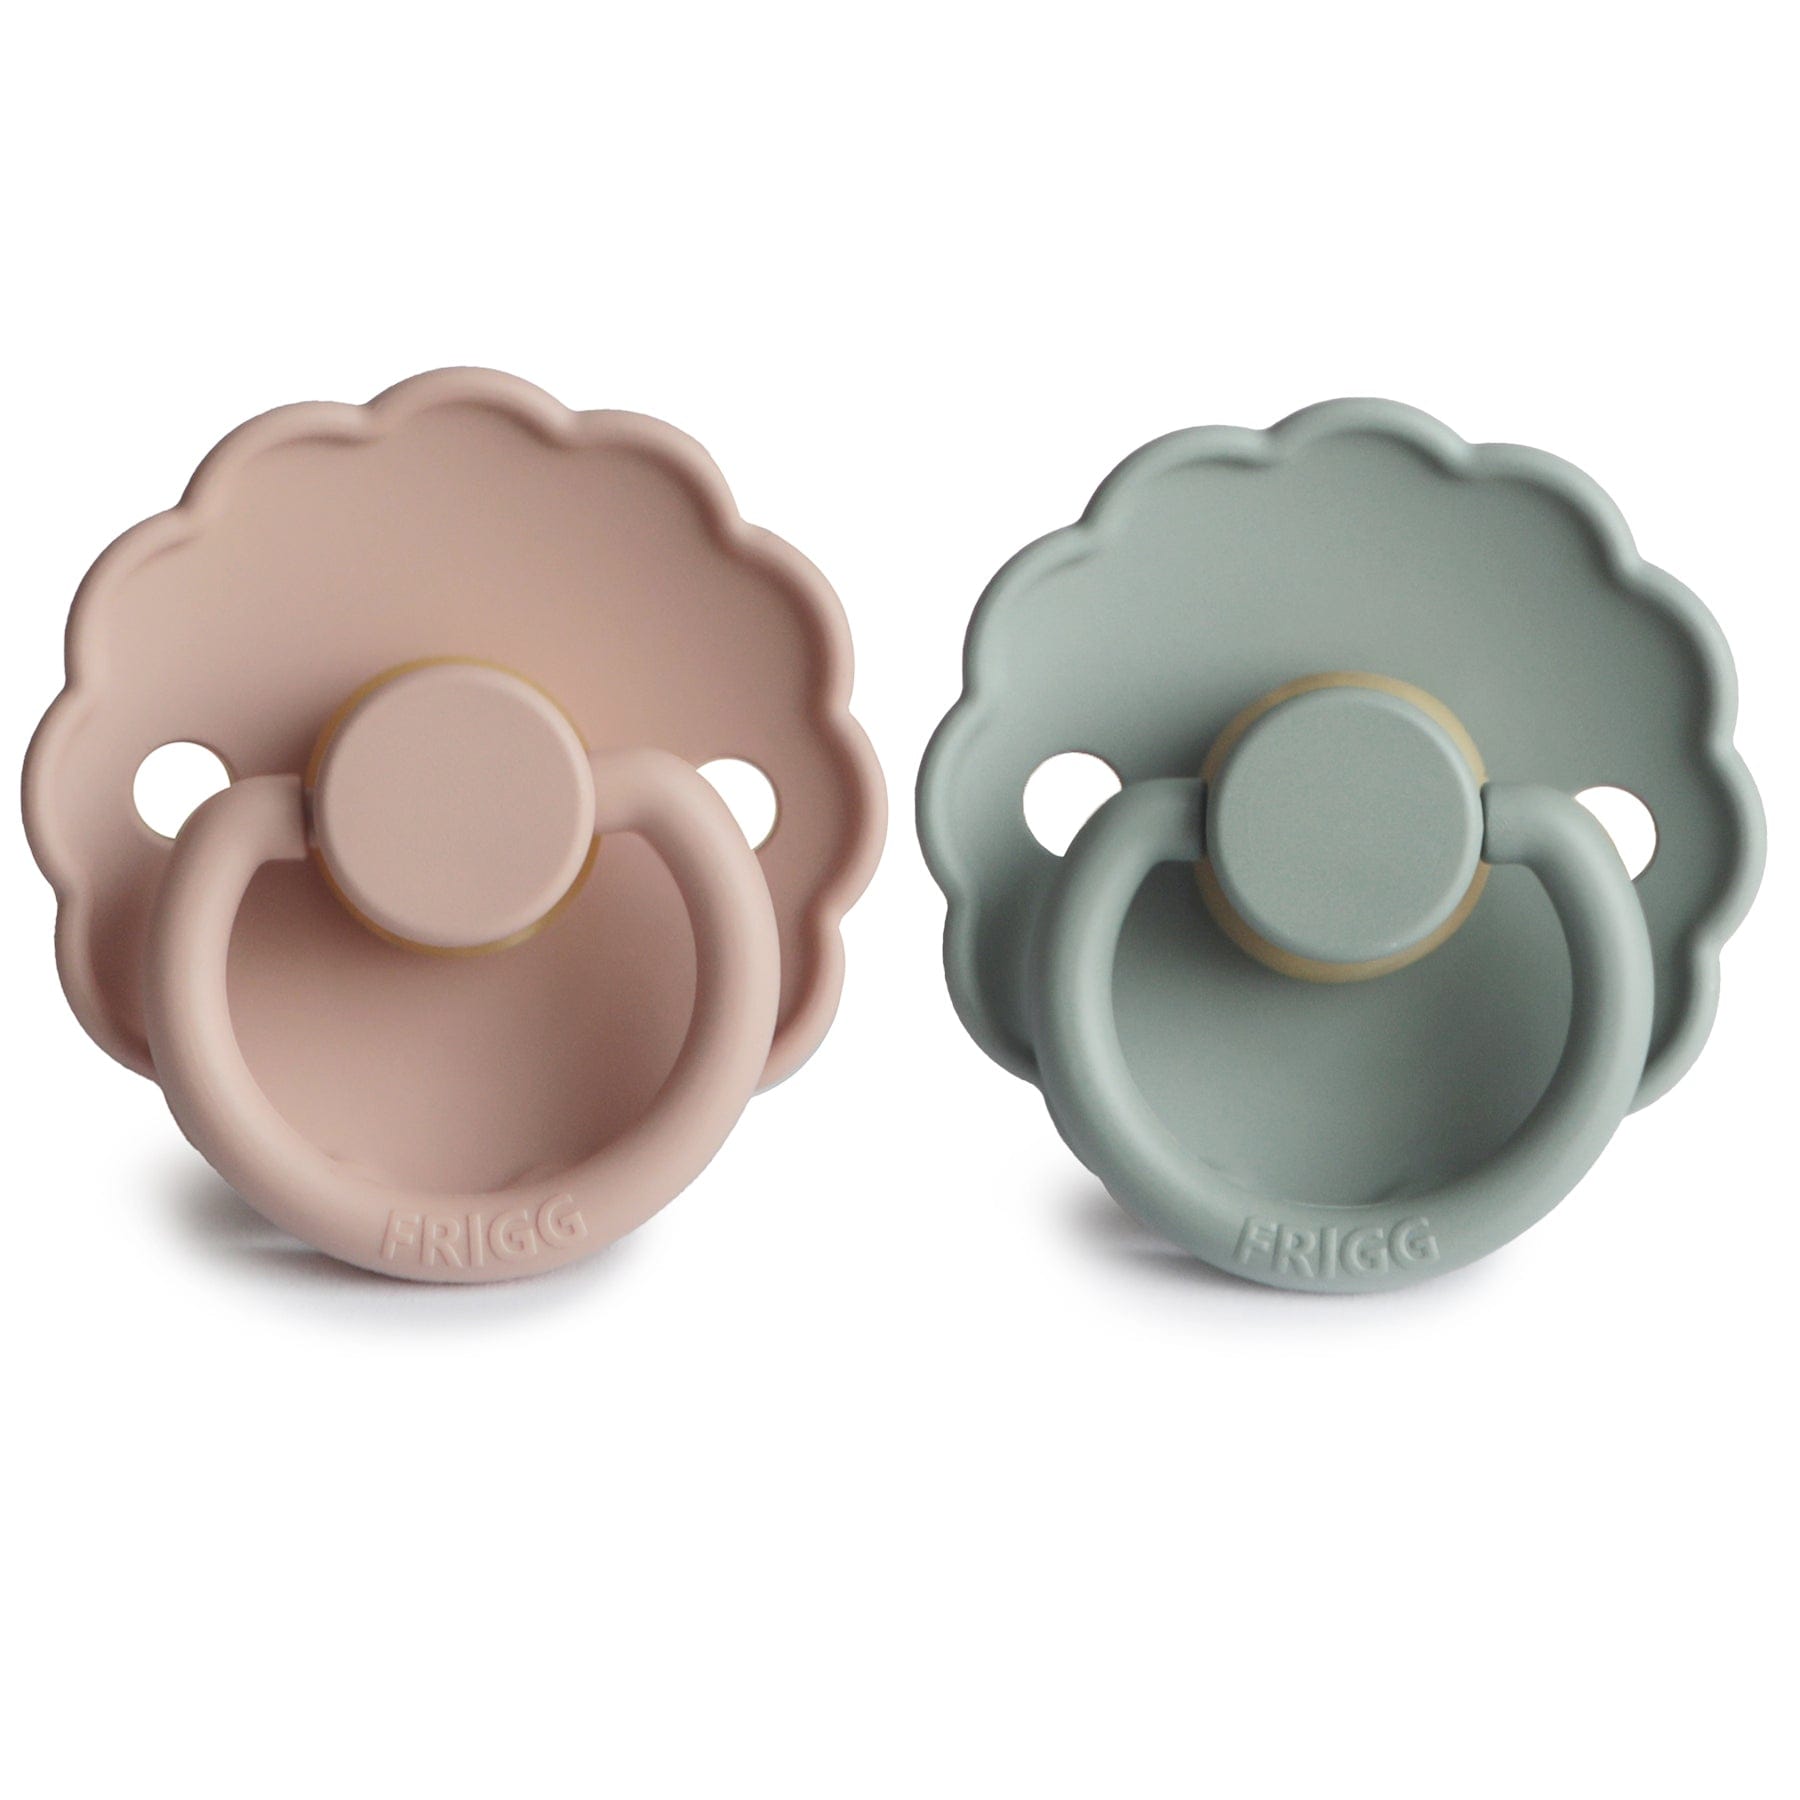 FRIGG Daisy Natural Rubber Baby Pacifier (Blush / Sage) Frigg Pacifiers & Teethers Lil Tulips